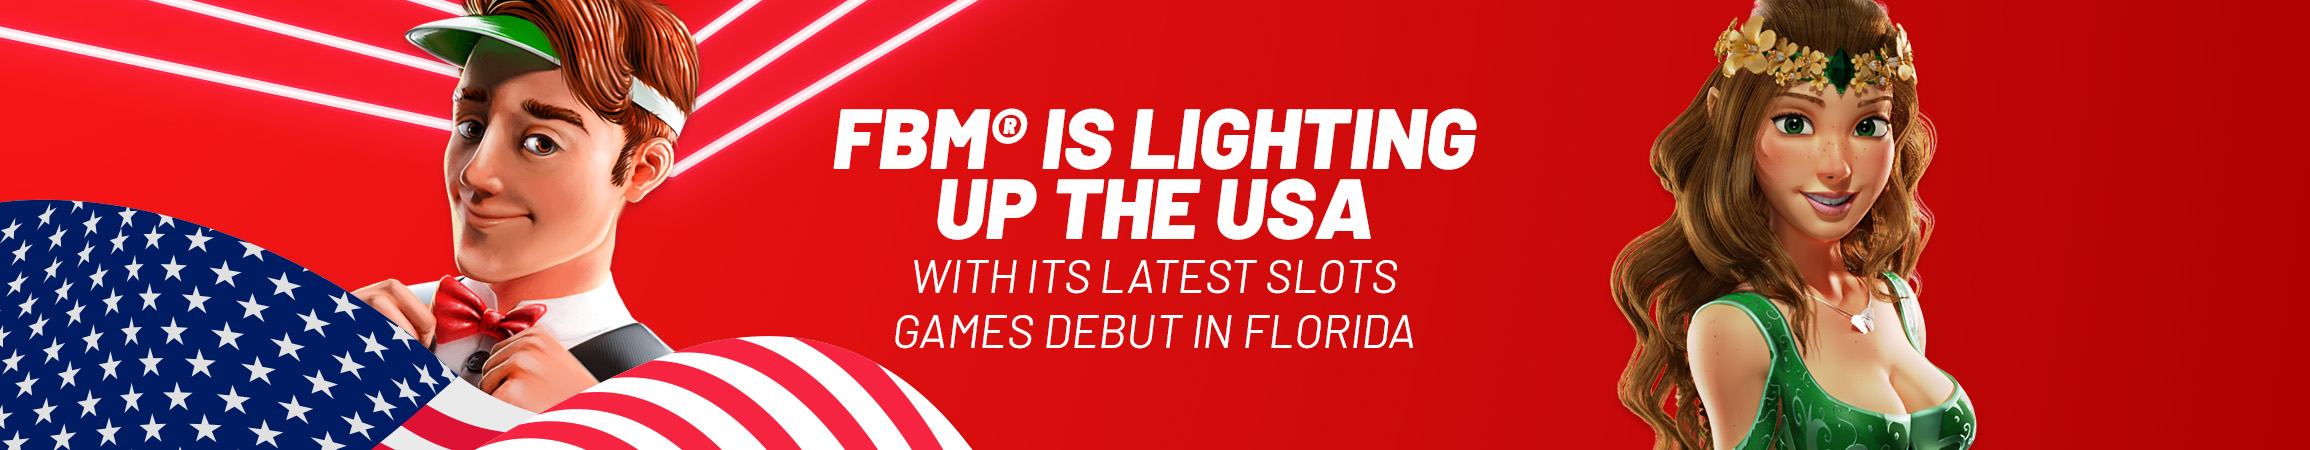 FBM® is lighting up the USA with its latest slots games debut in Florida